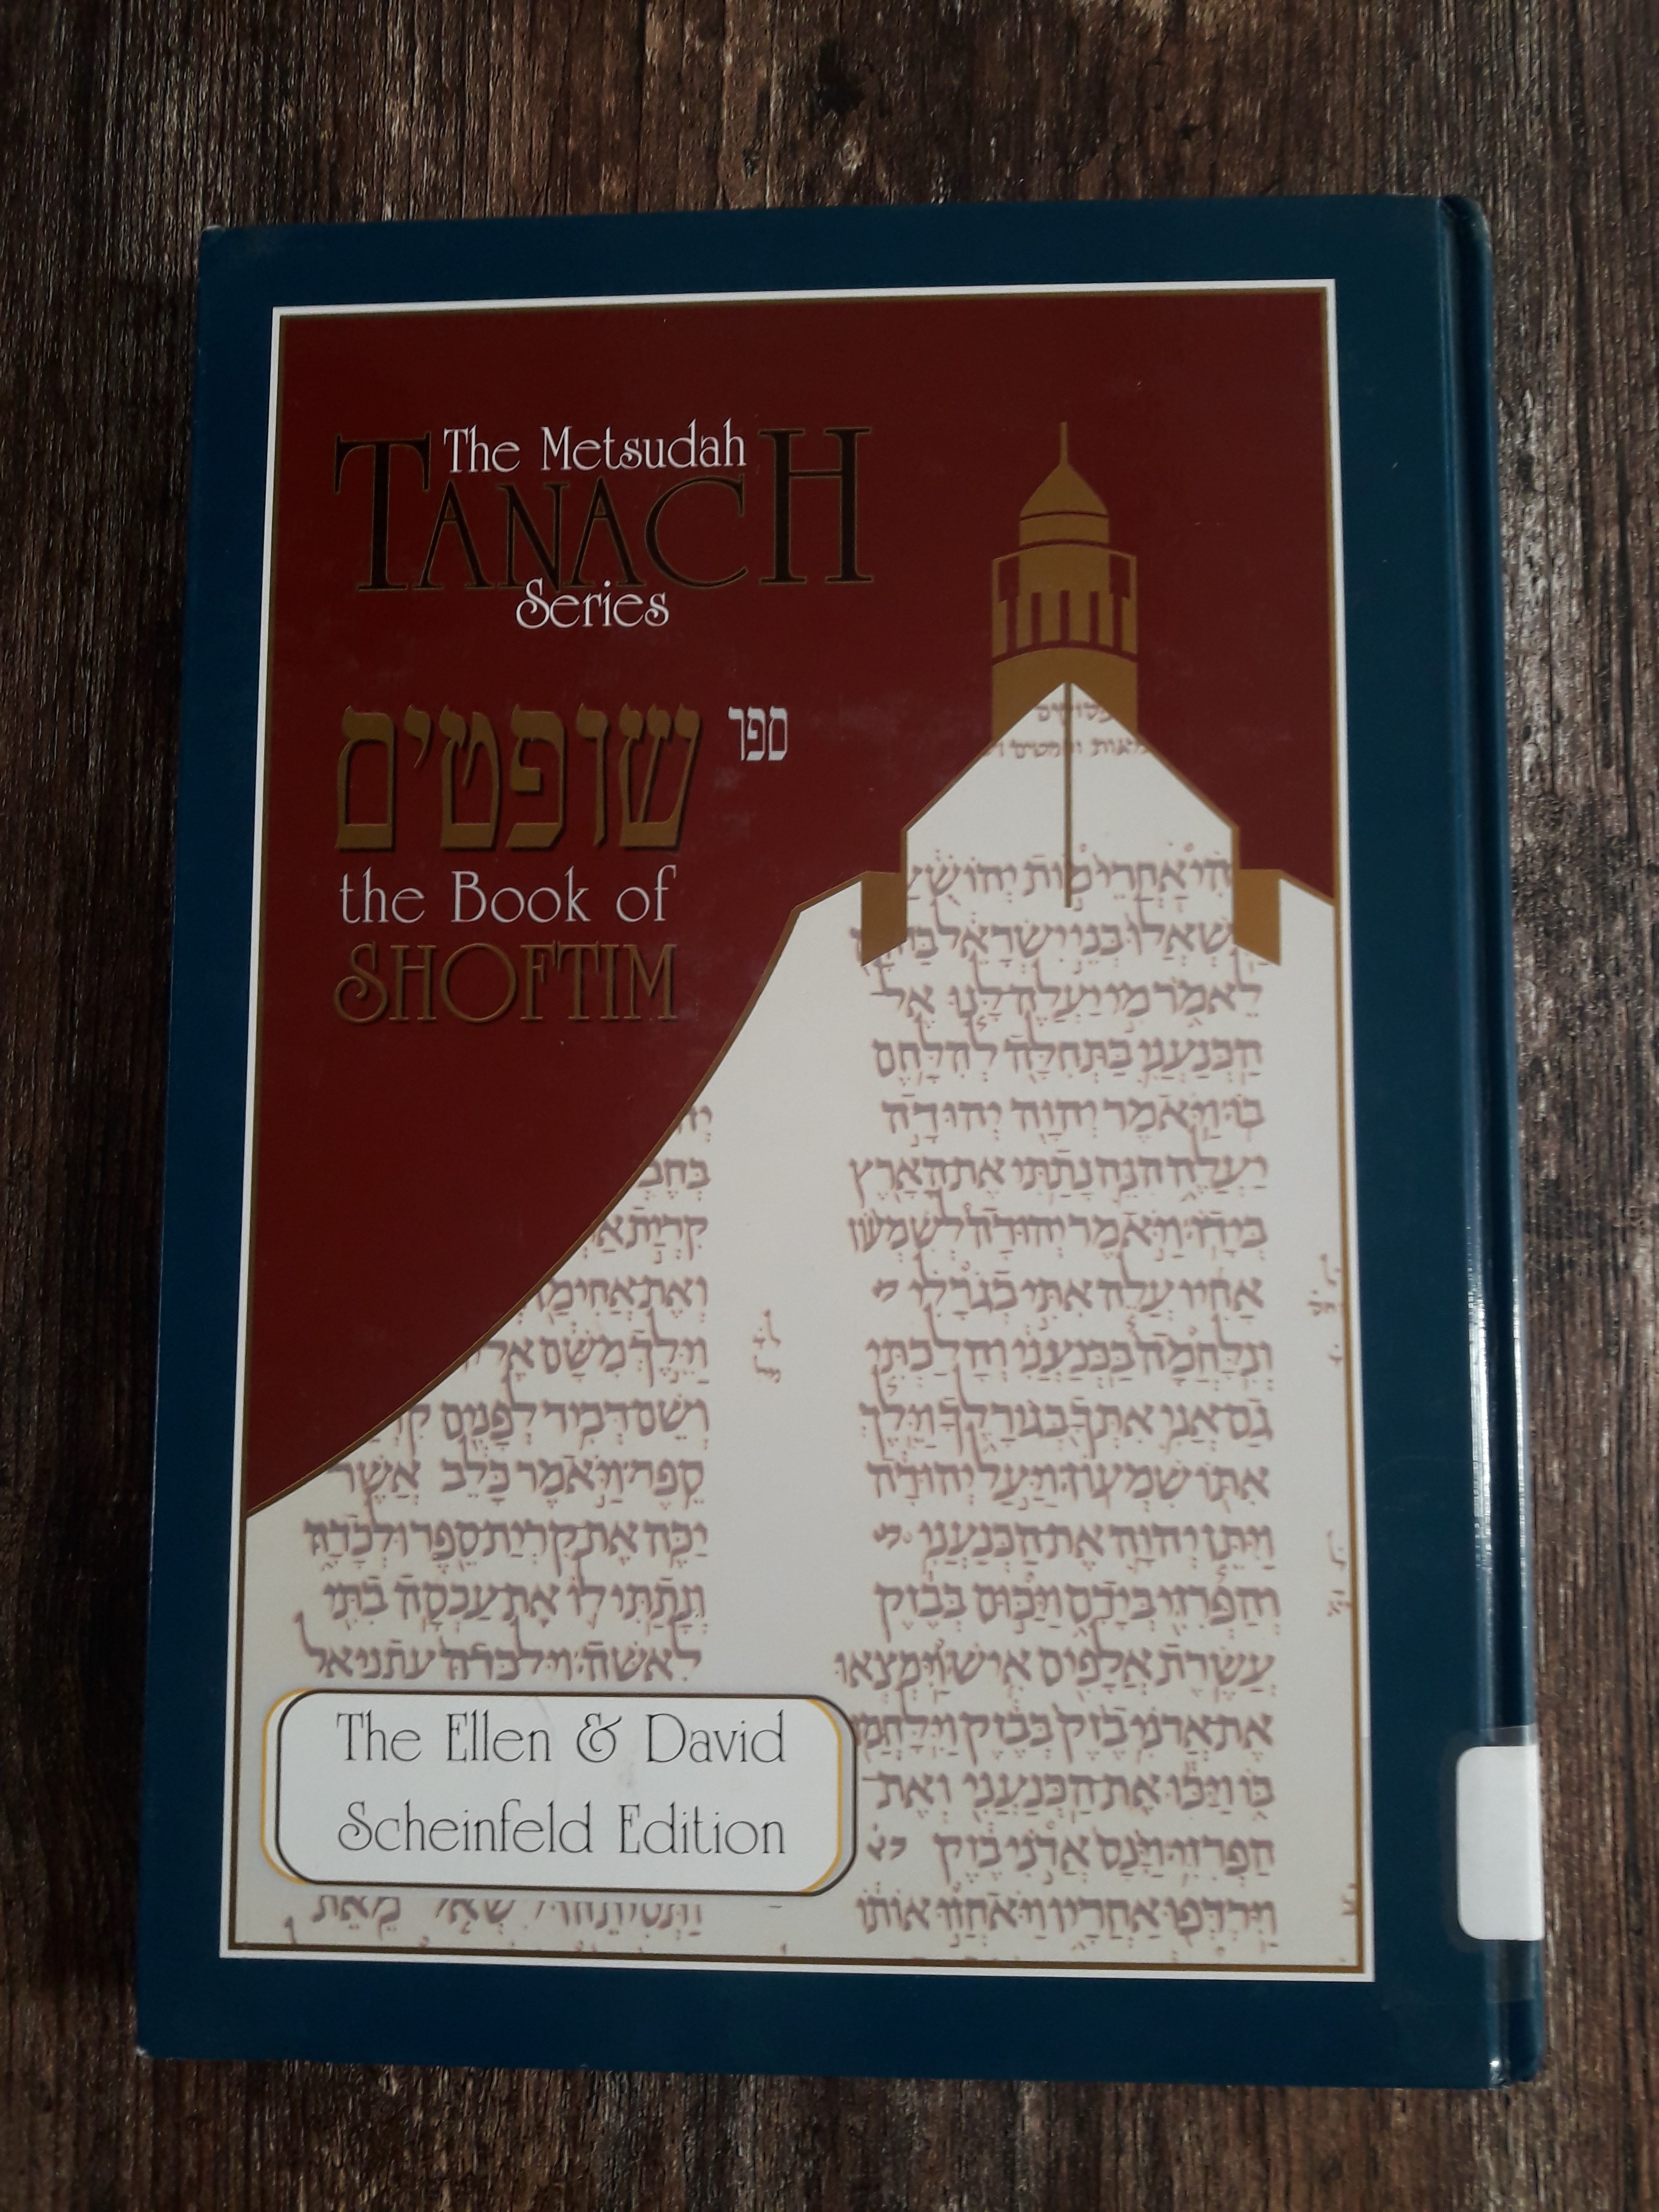 The book of Shoftim: a new translation with a commentary anthologized from Talmudic, Midrashic, and rabbinic sources